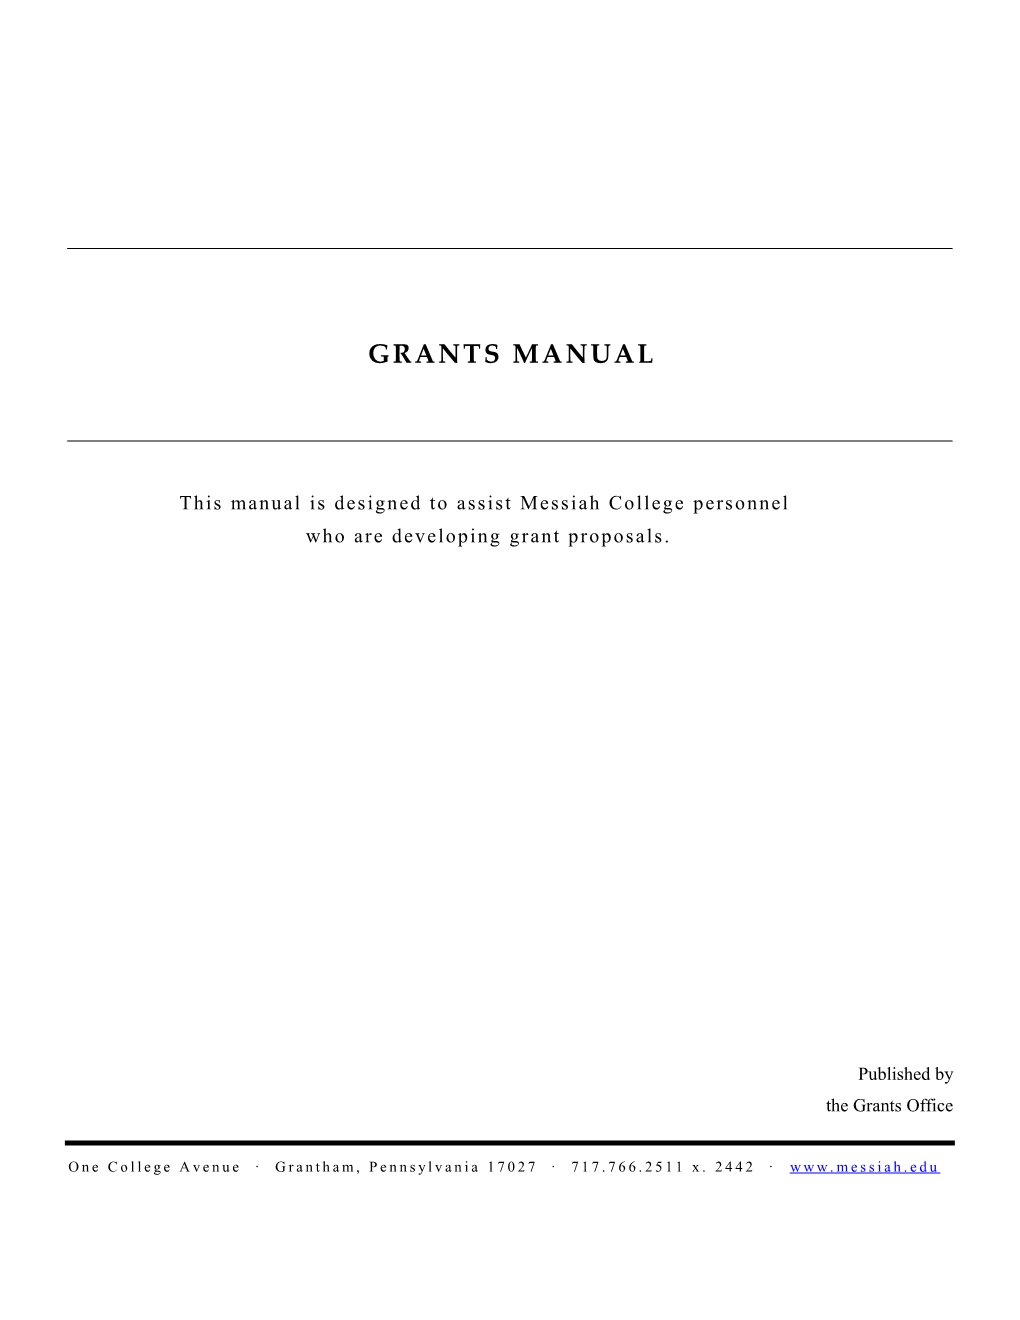 This Manual Is Designed to Assist Messiahcollege Personnel